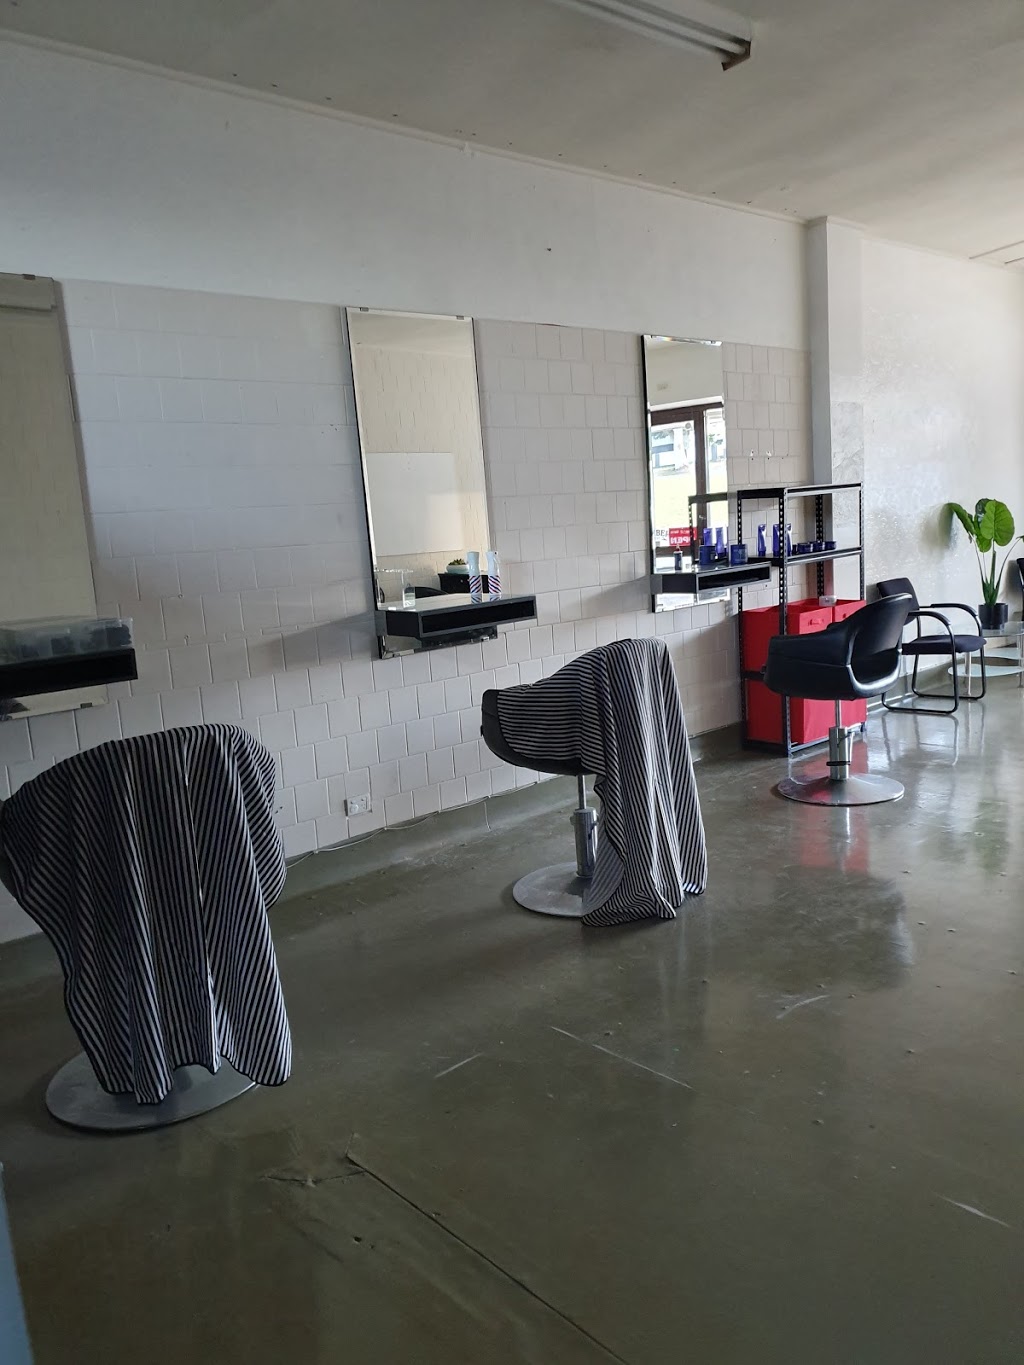 Sands Barber | 332A Pacific Hwy, Belmont North NSW 2280, Australia | Phone: 0481 185 971